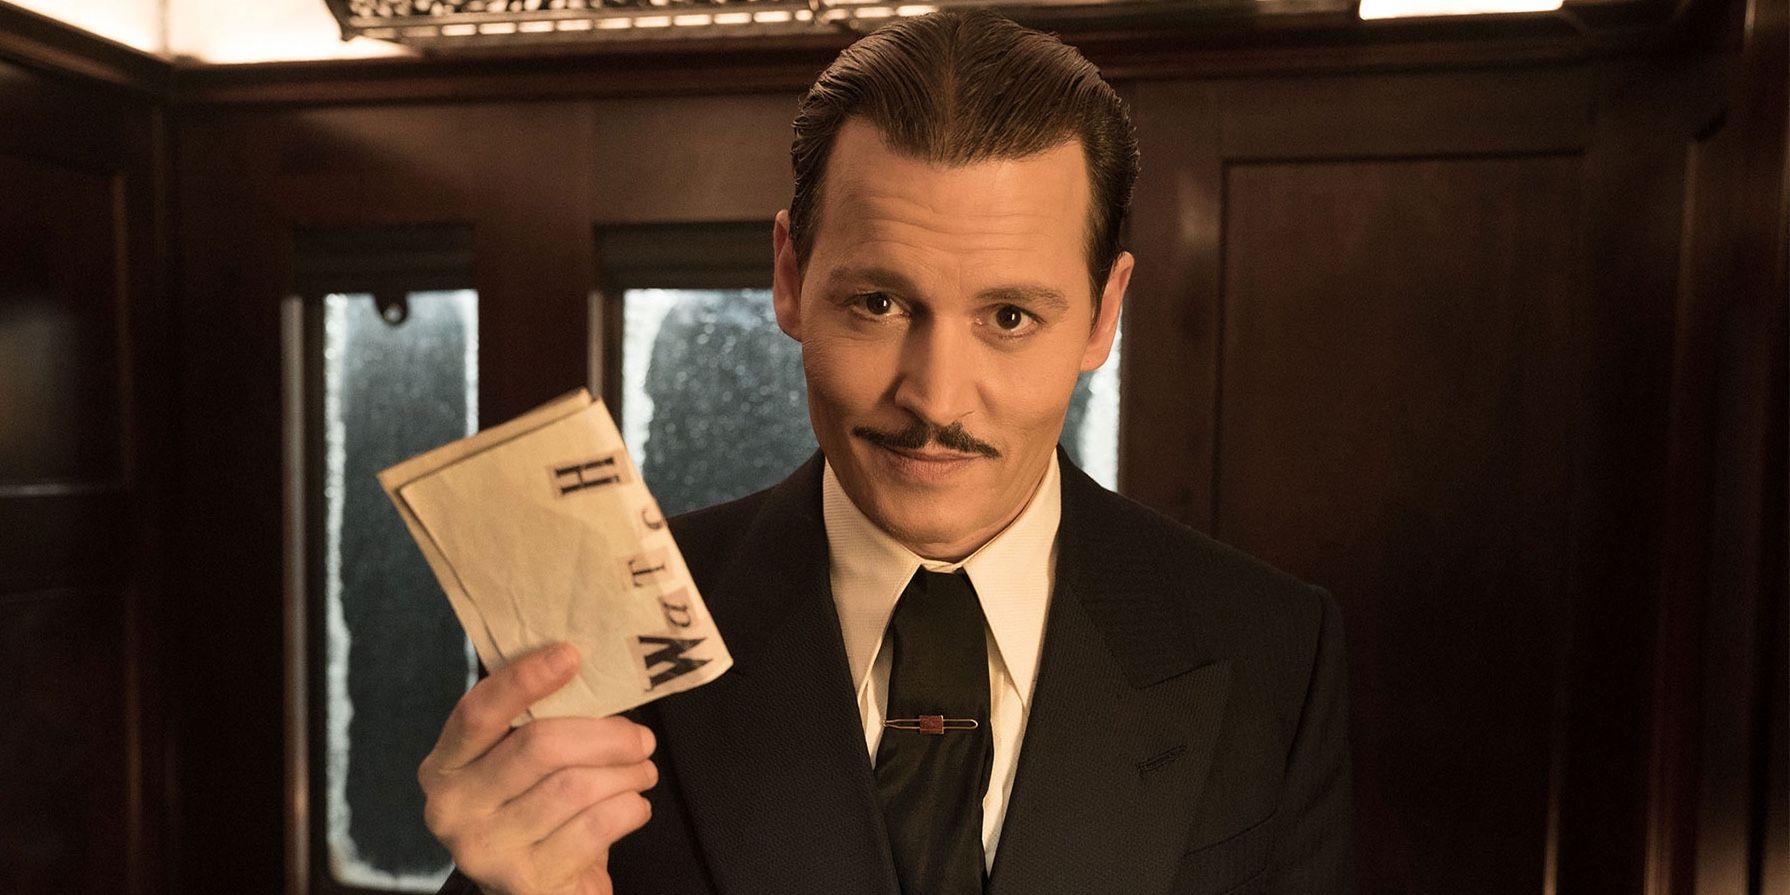 Johnny Depp as edward ratchett holding a map in Murder on the Orient Express